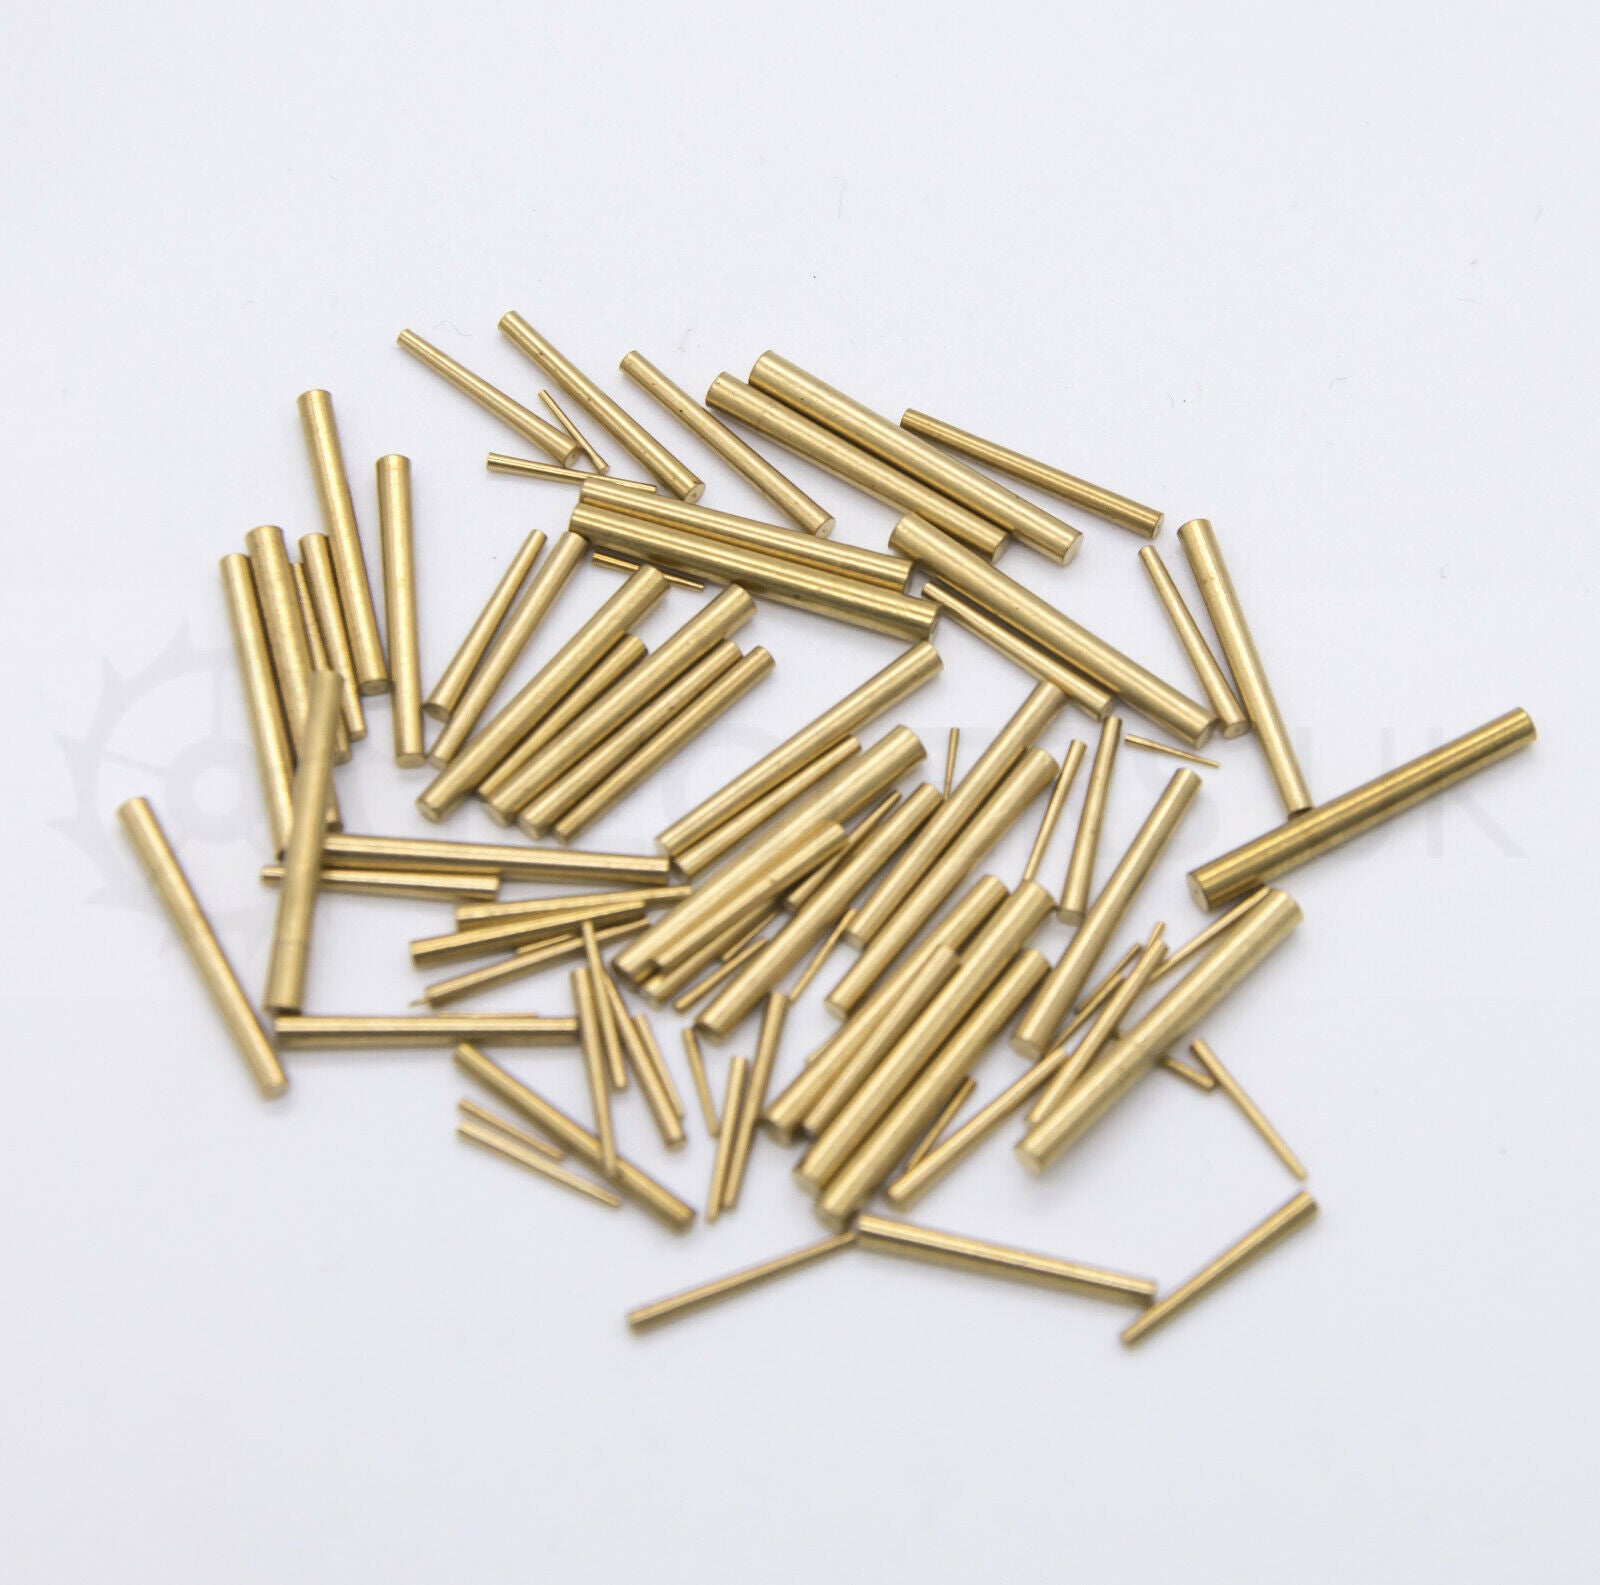 100x Brass Clock Tapered Pins - Assorted Mixed Sizes